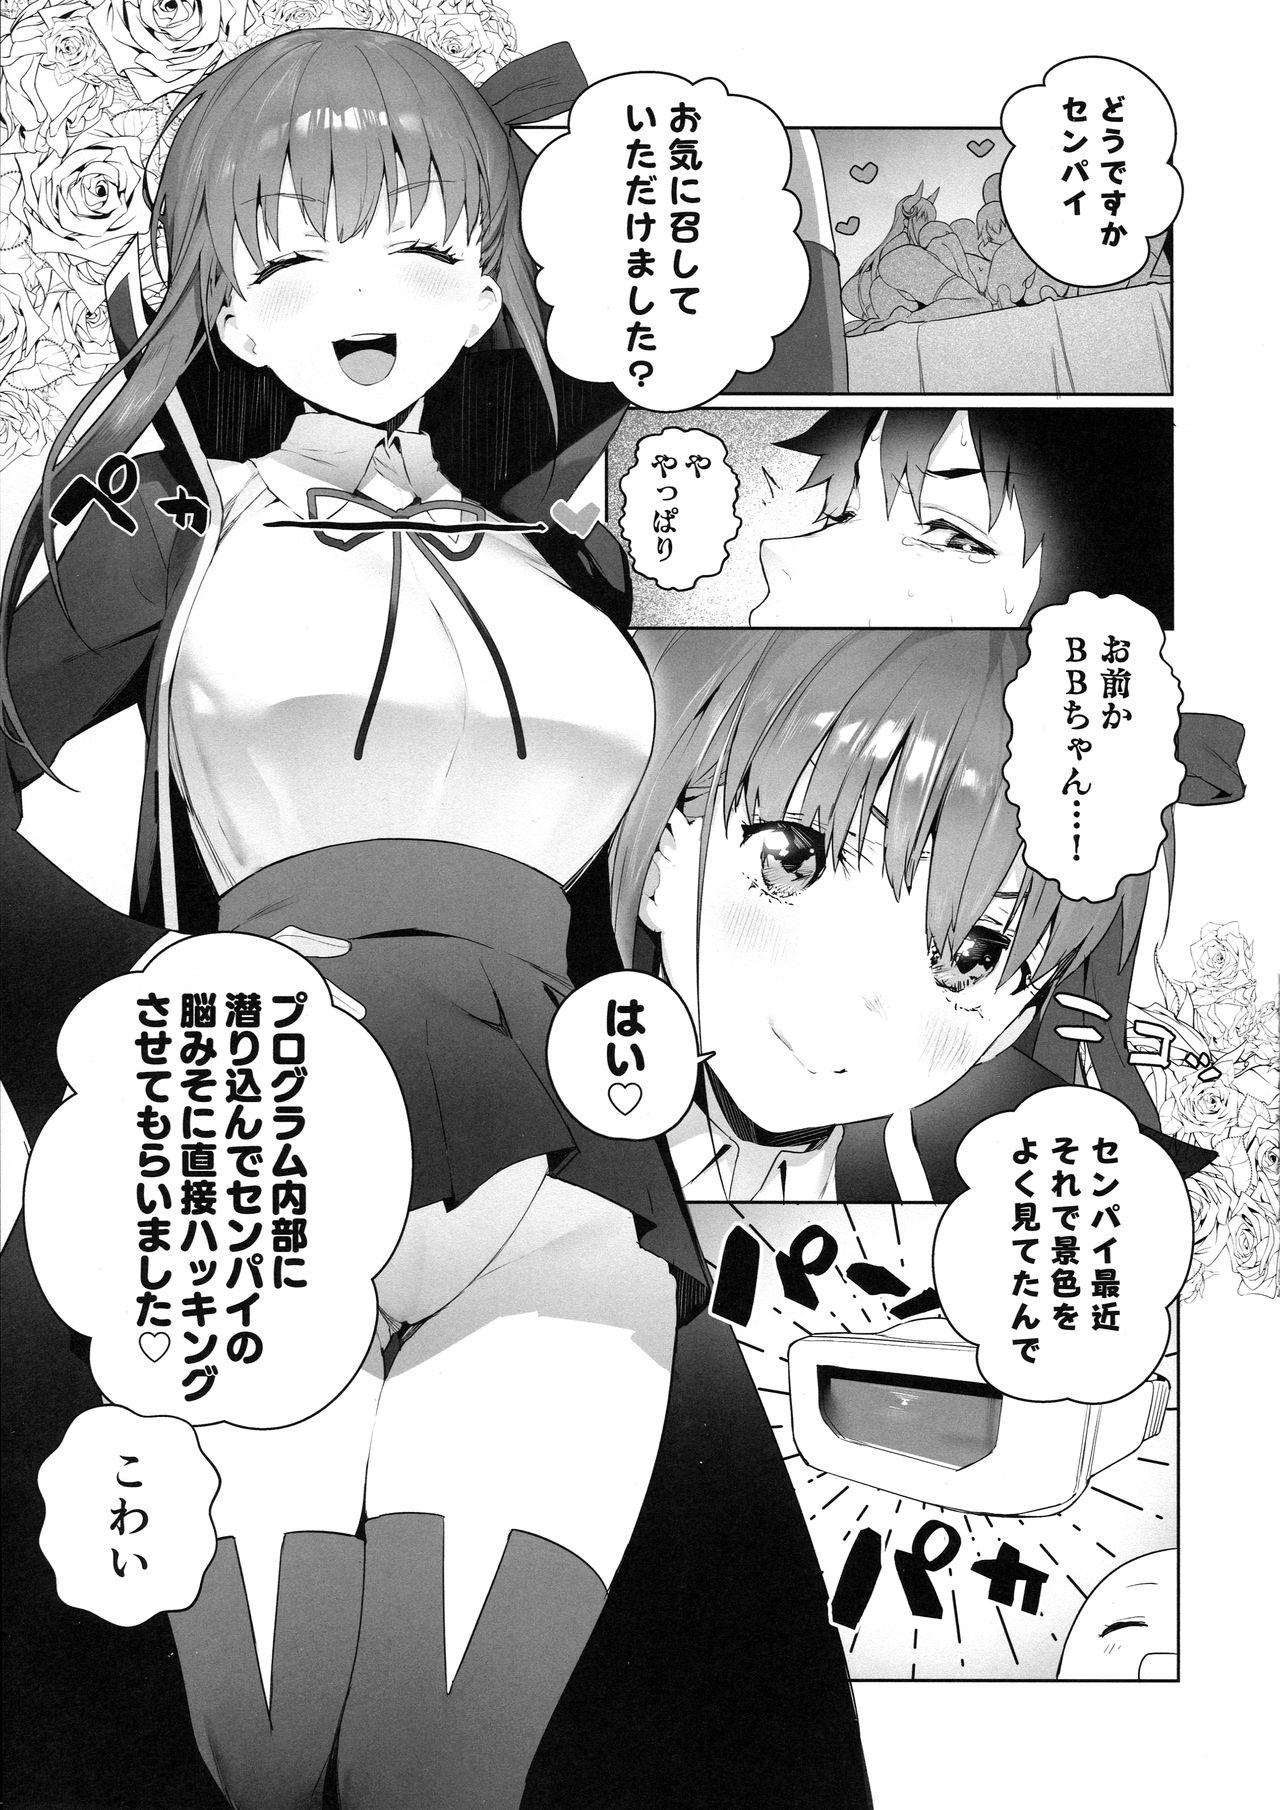 Thai LOVELESS - Fate grand order Naughty - Page 4